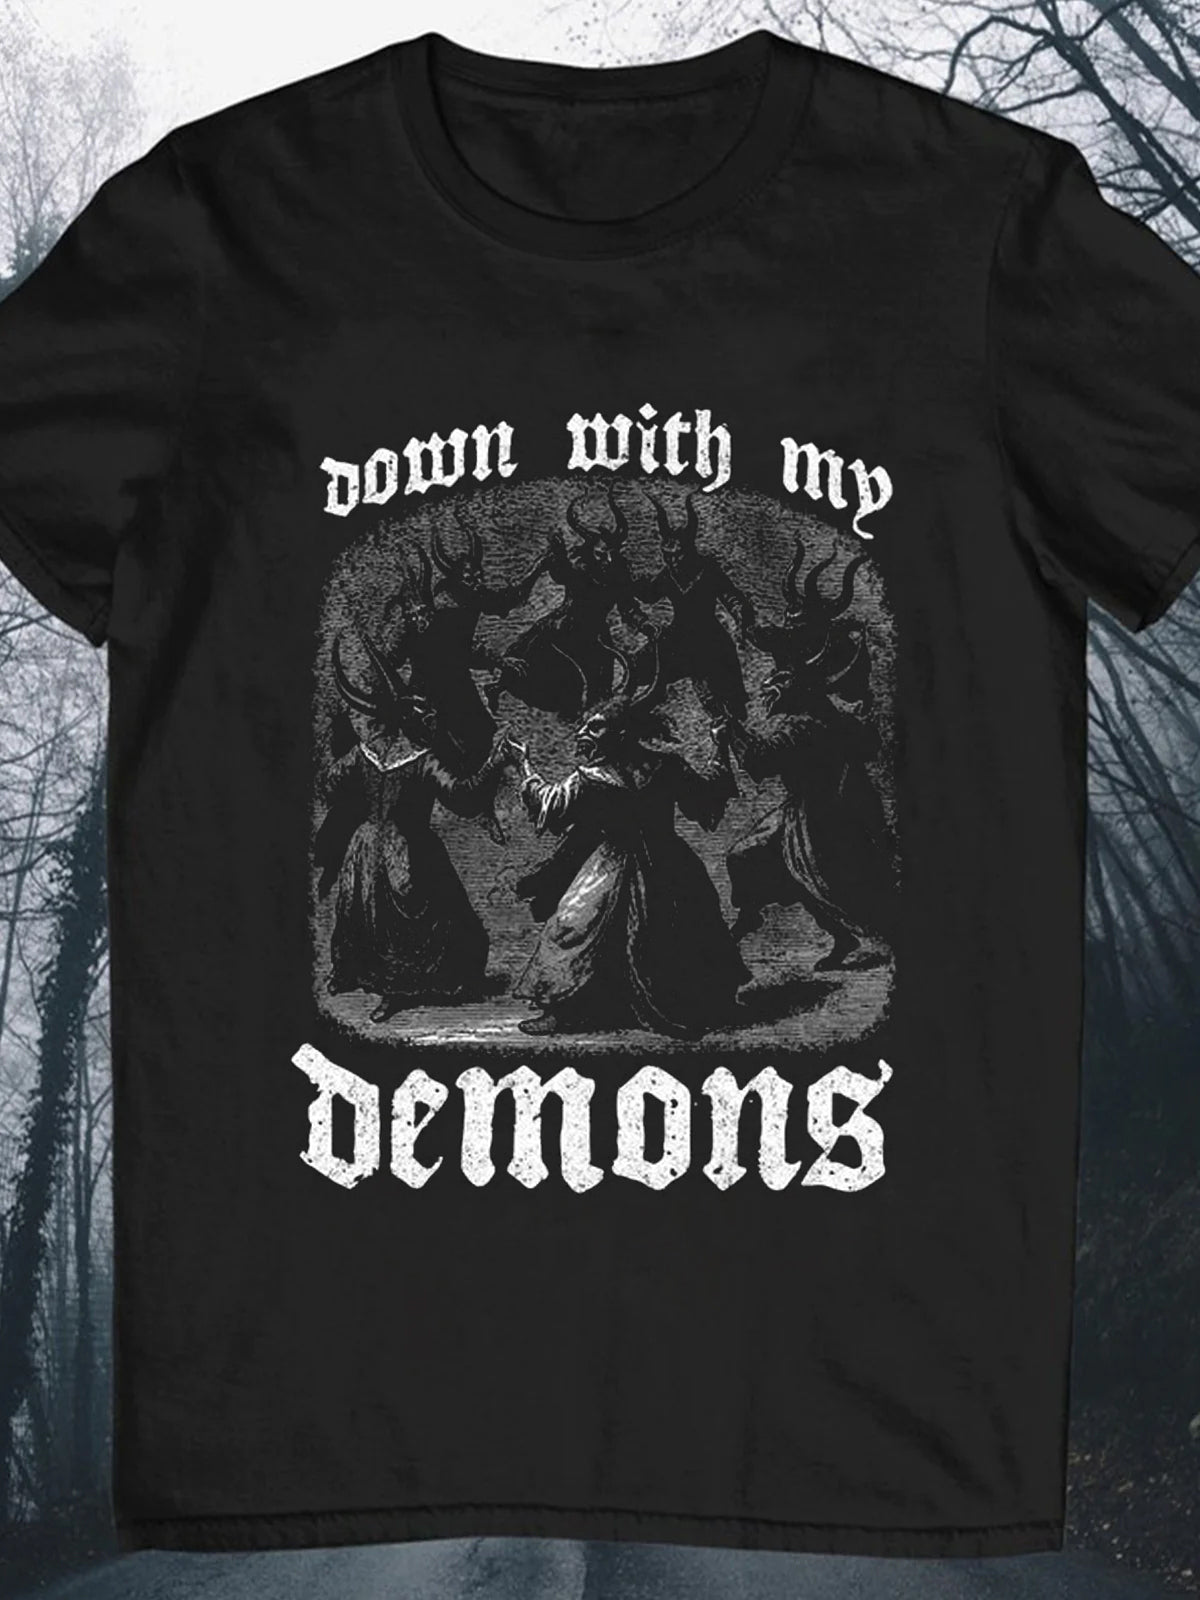 Down With My Demons Crew Neck Short Sleeve Men's T-Shirt